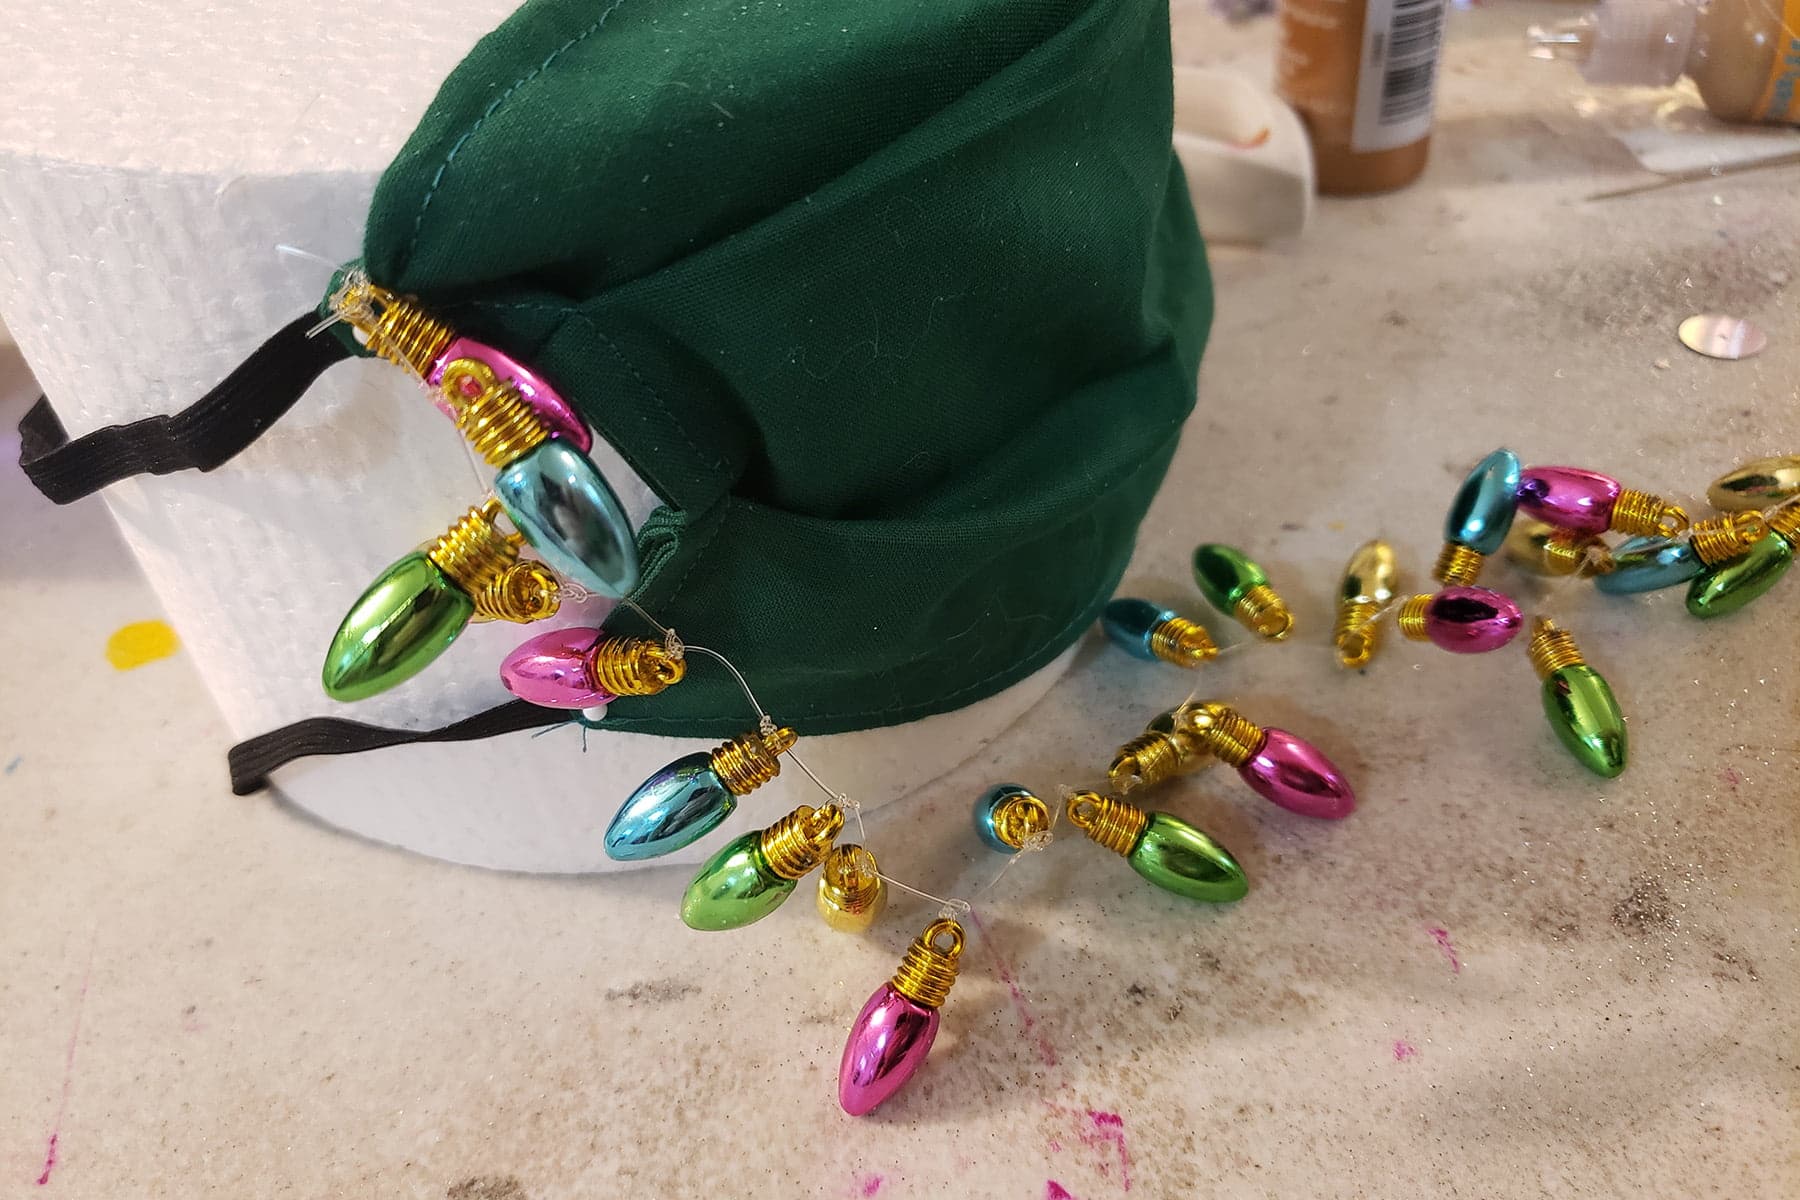 A green mask attached to a round of styrofoam.  A string of beads that look like Christmas tree lights is secured to one corner, and laying on the table in front of the mask.